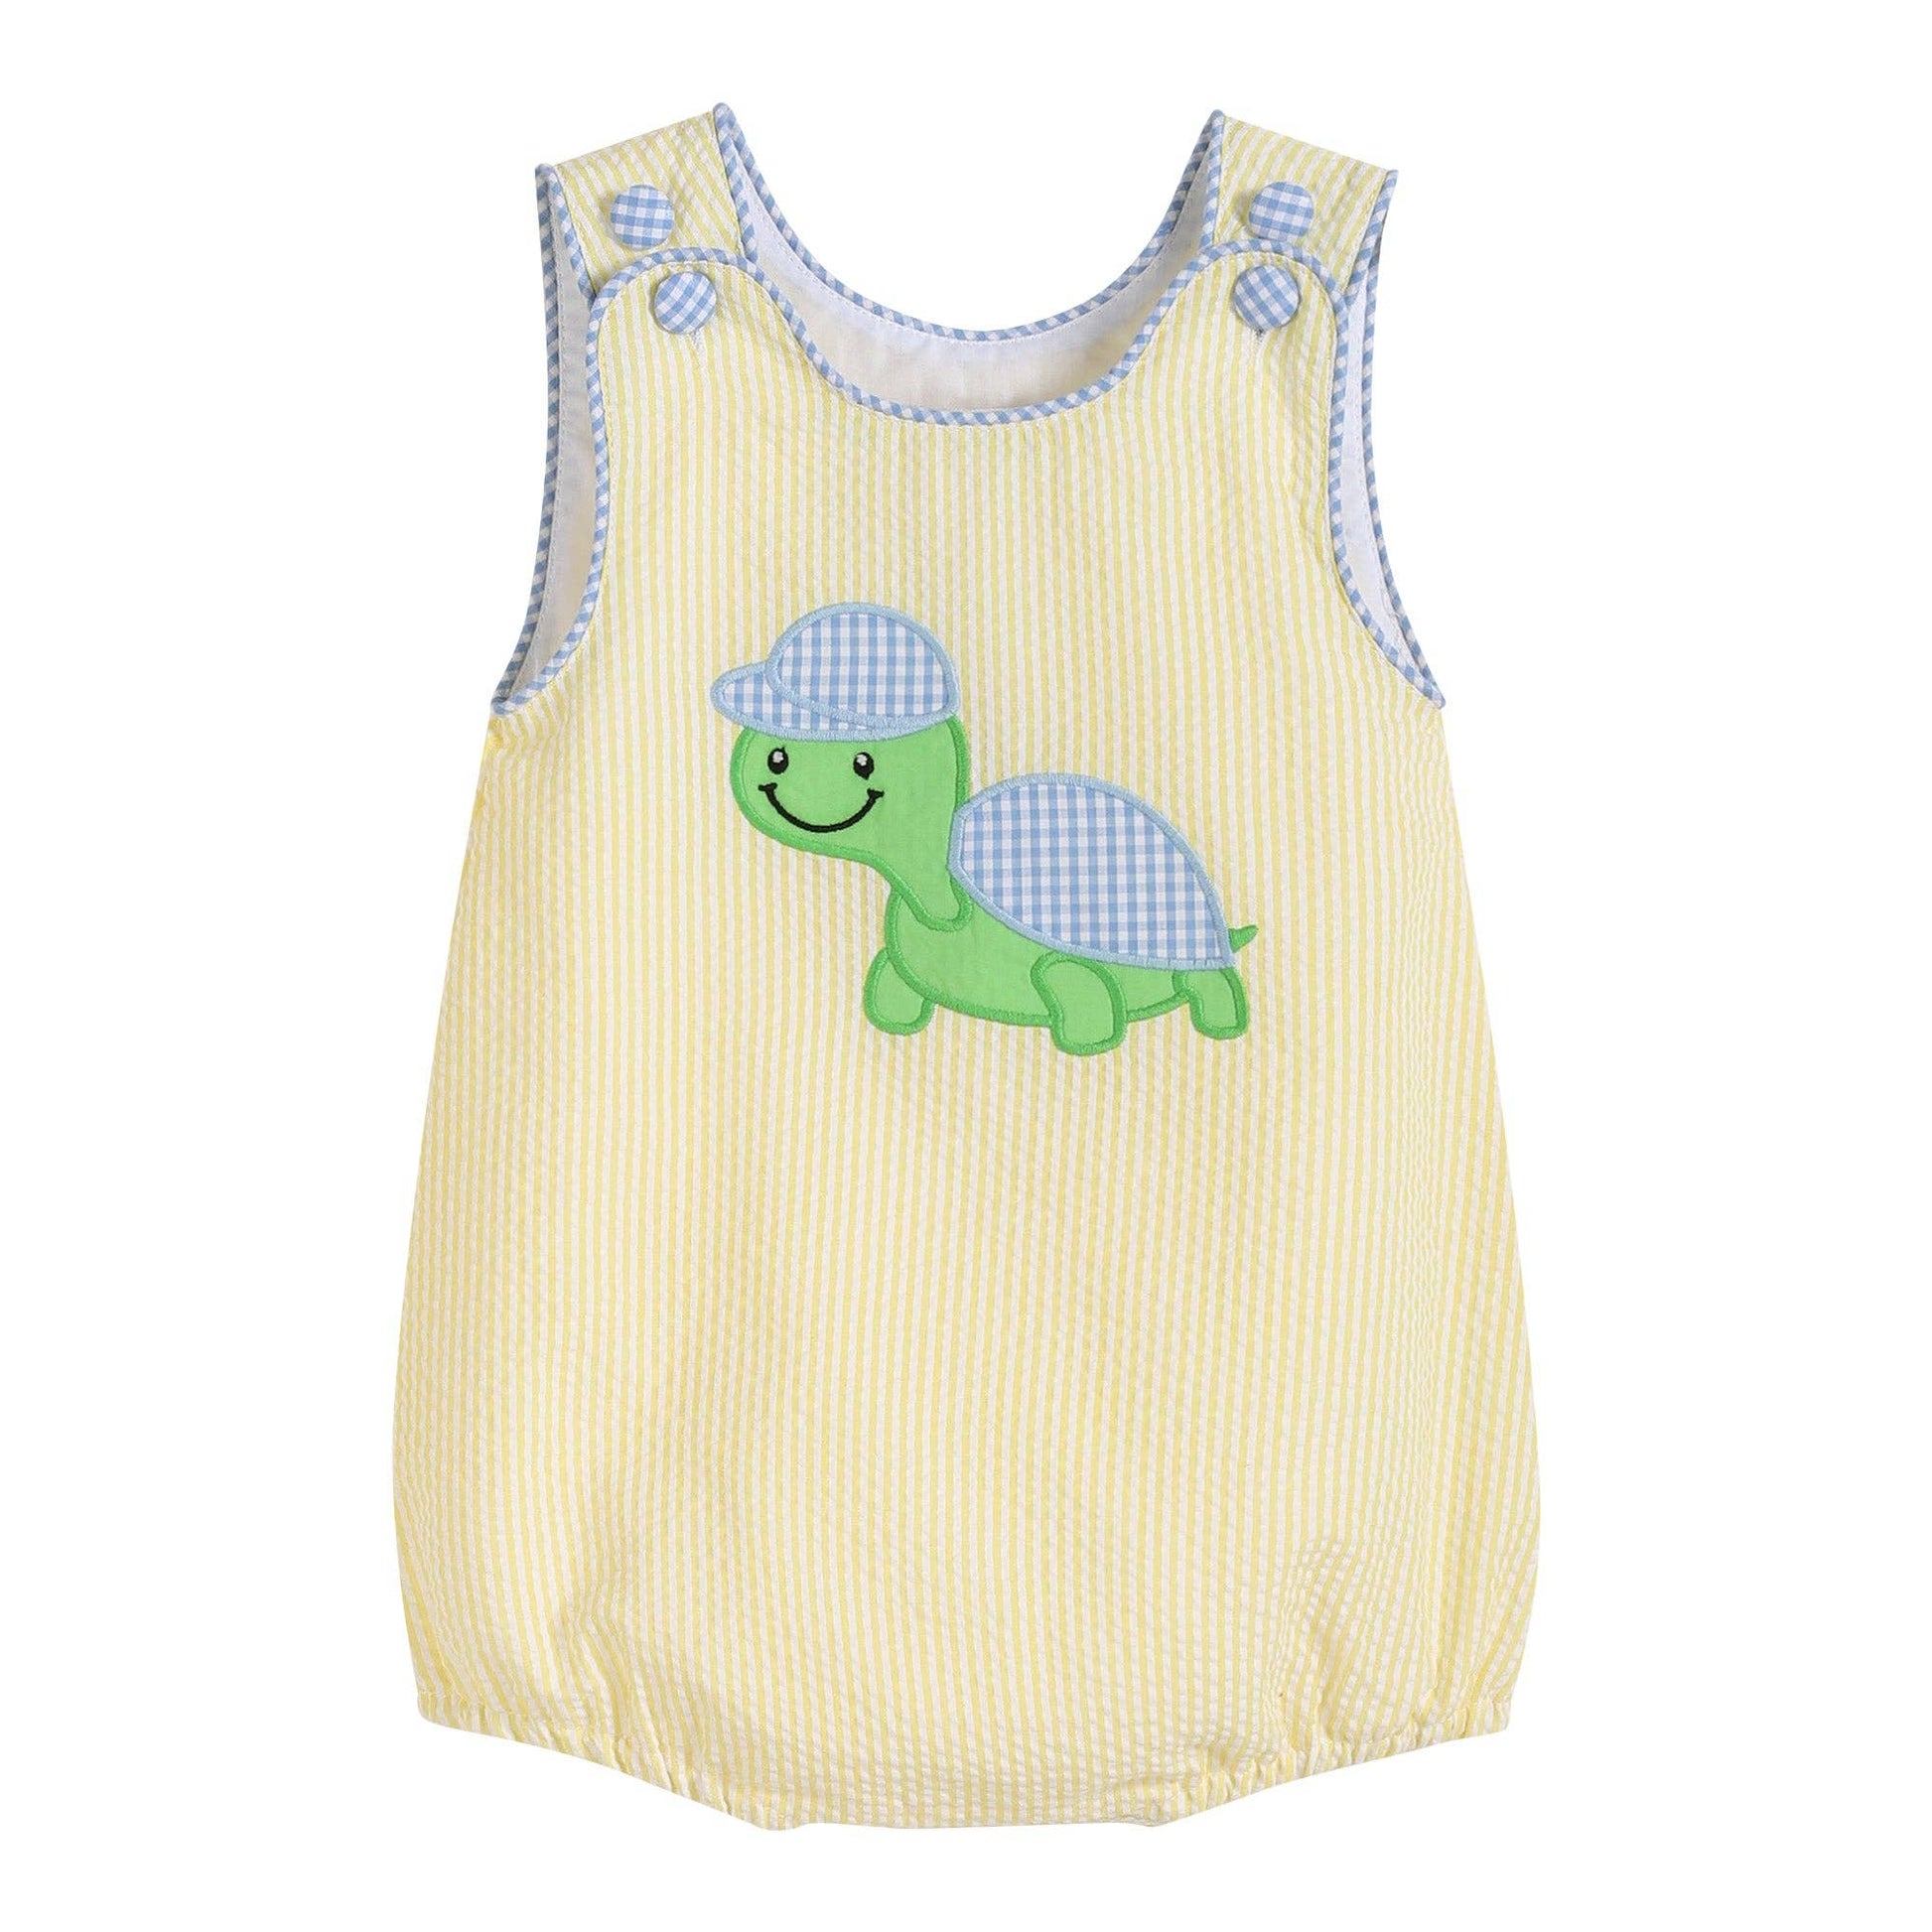 A Yellow Seersucker Turtle Baby Romper from Lil Cactus, both comfortable and cute.